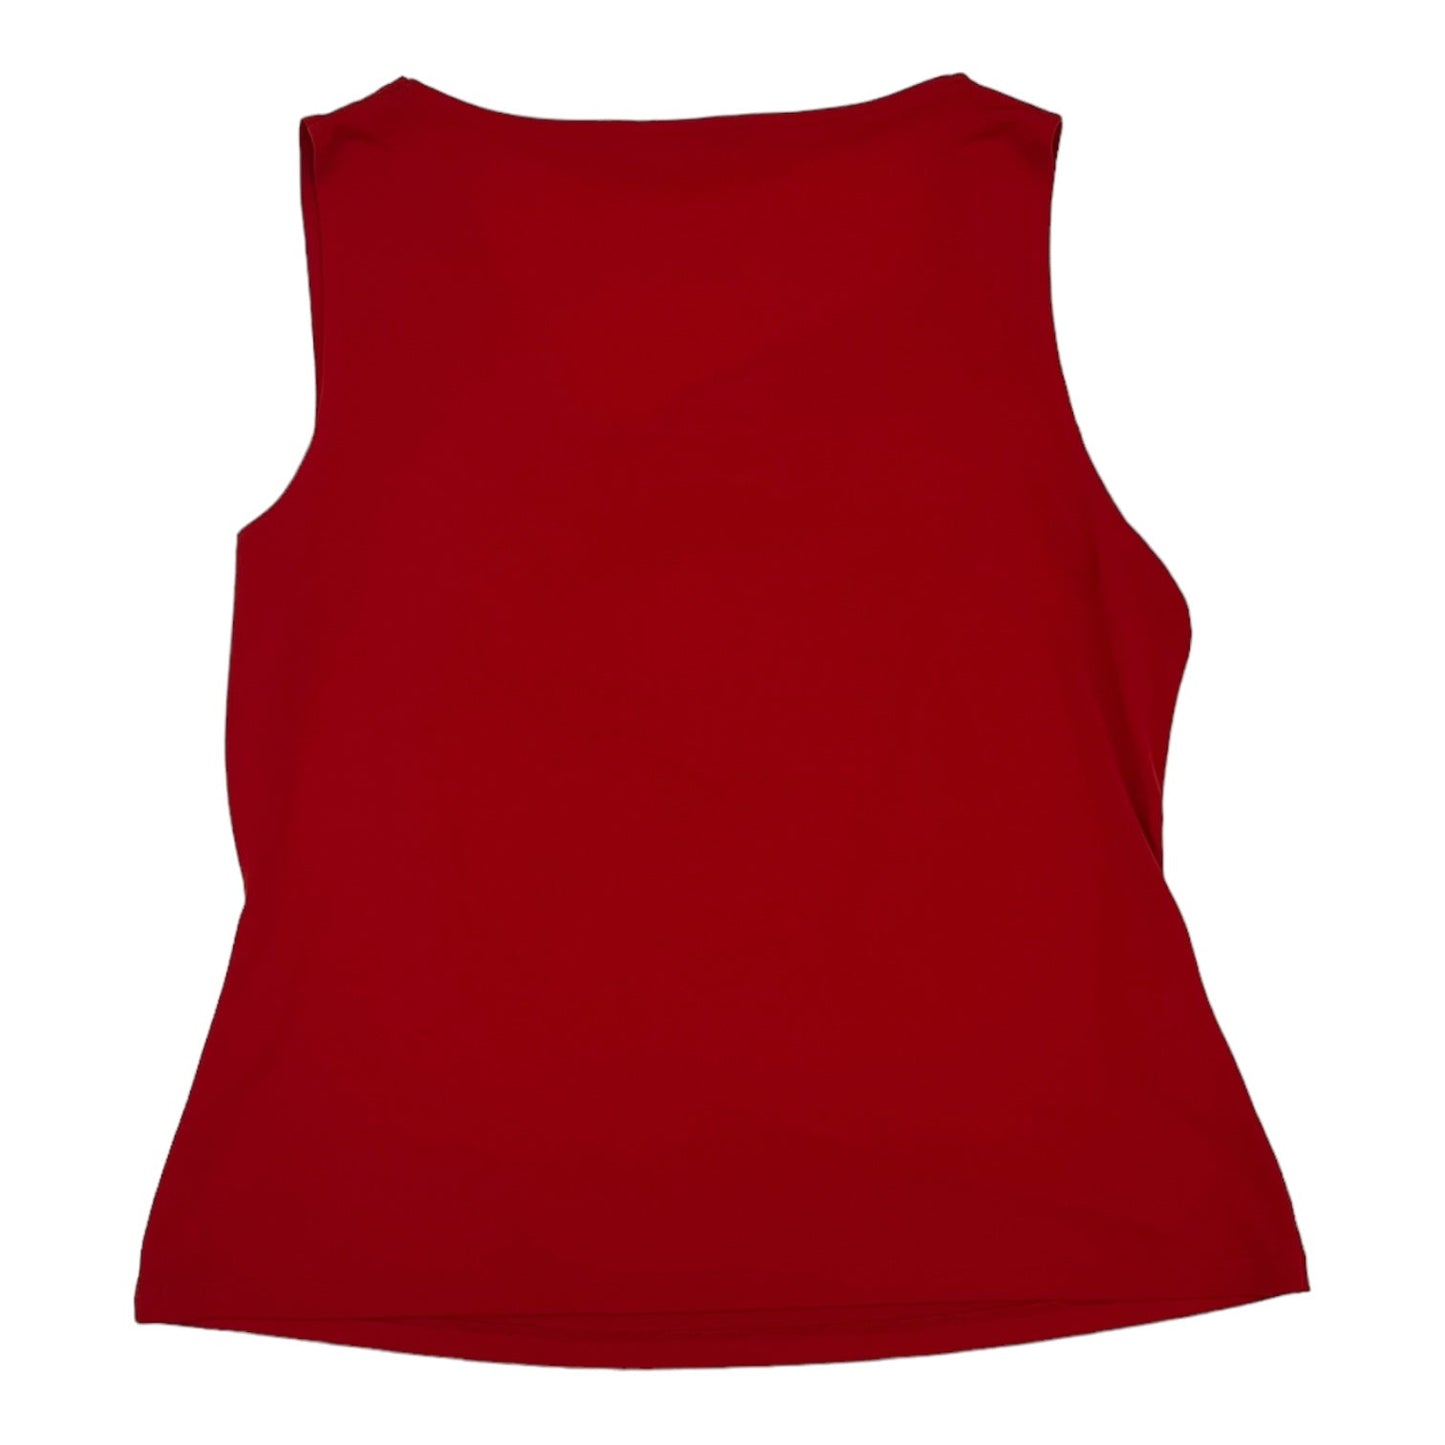 RED TOP SLEEVELESS by CALVIN KLEIN Size:XL